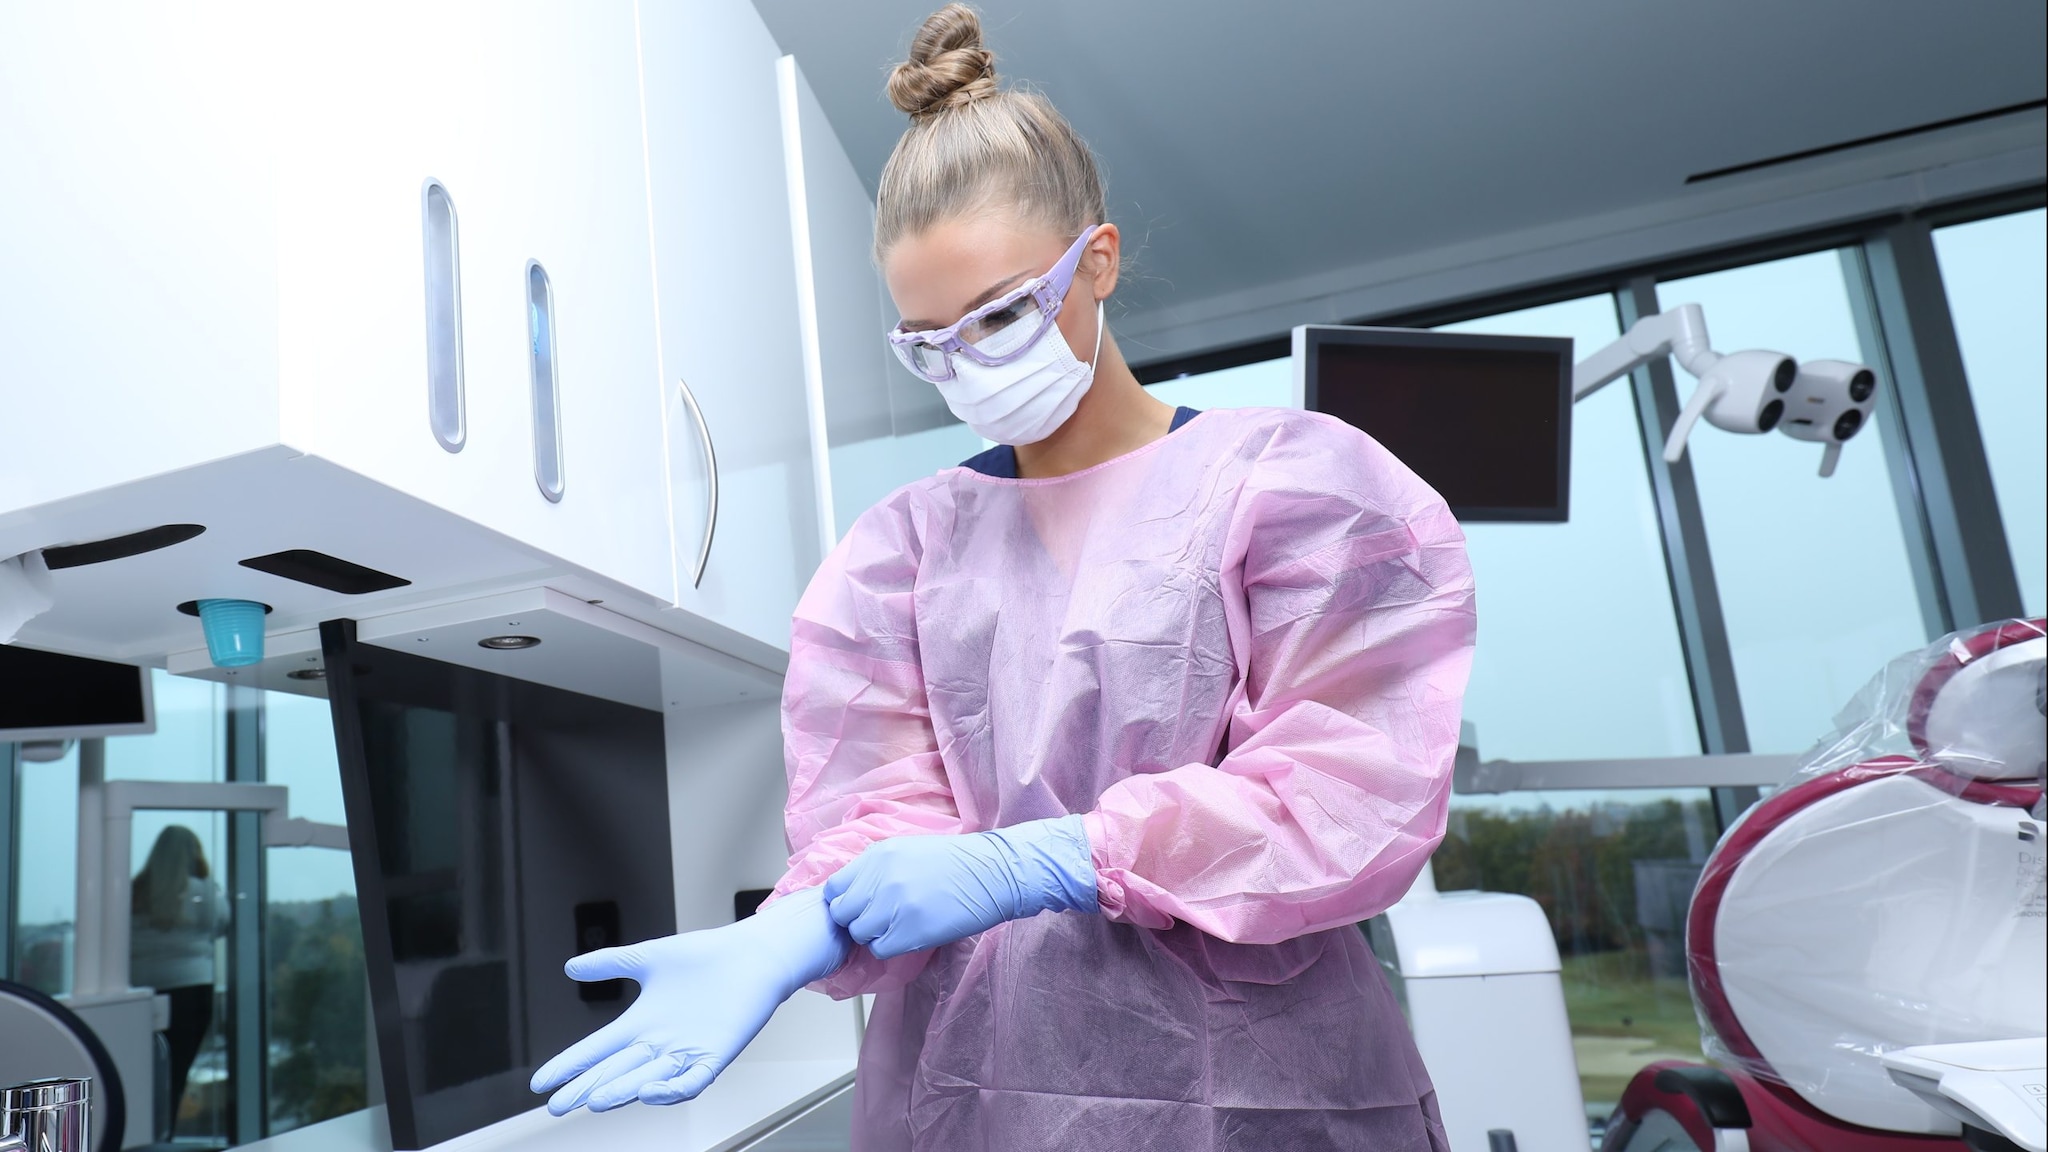 Dental health care personnel donning gloves.